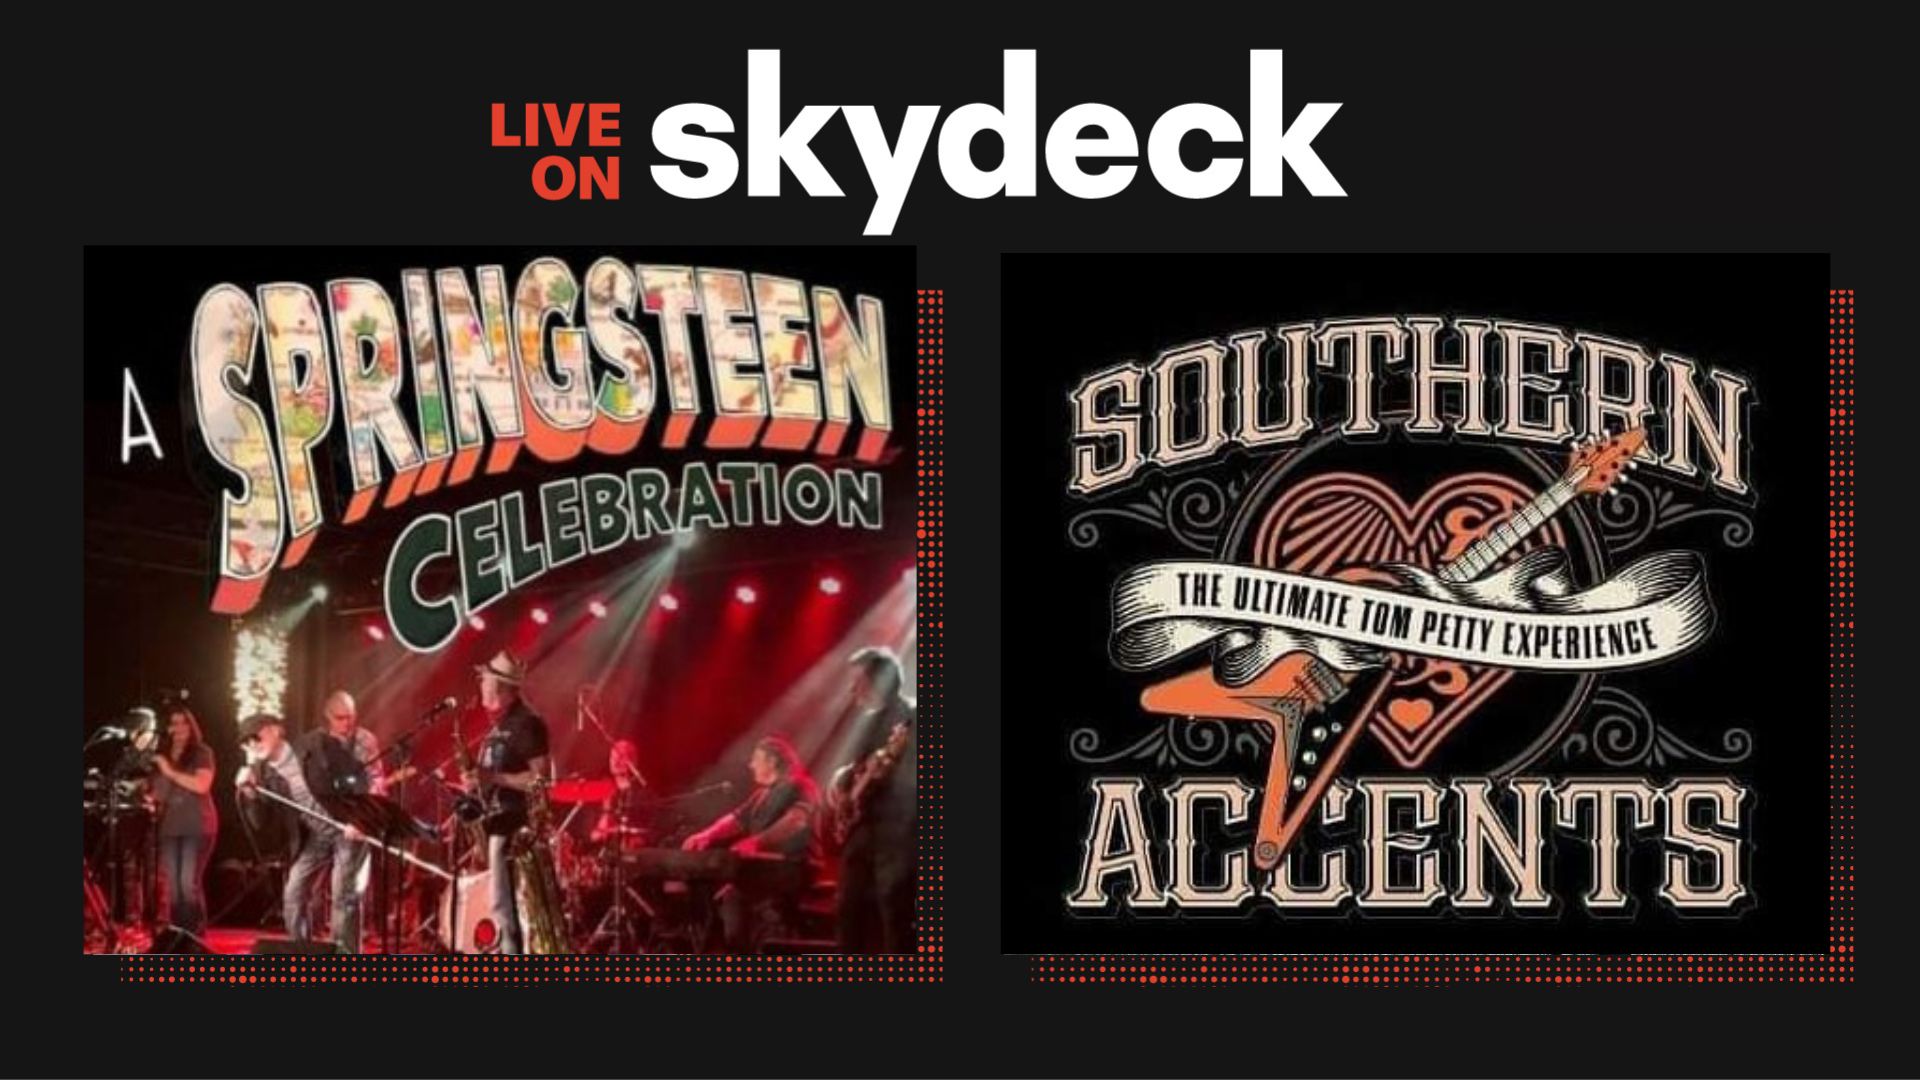 Southern Accents + A Springsteen Celebration on Skydeck - hero